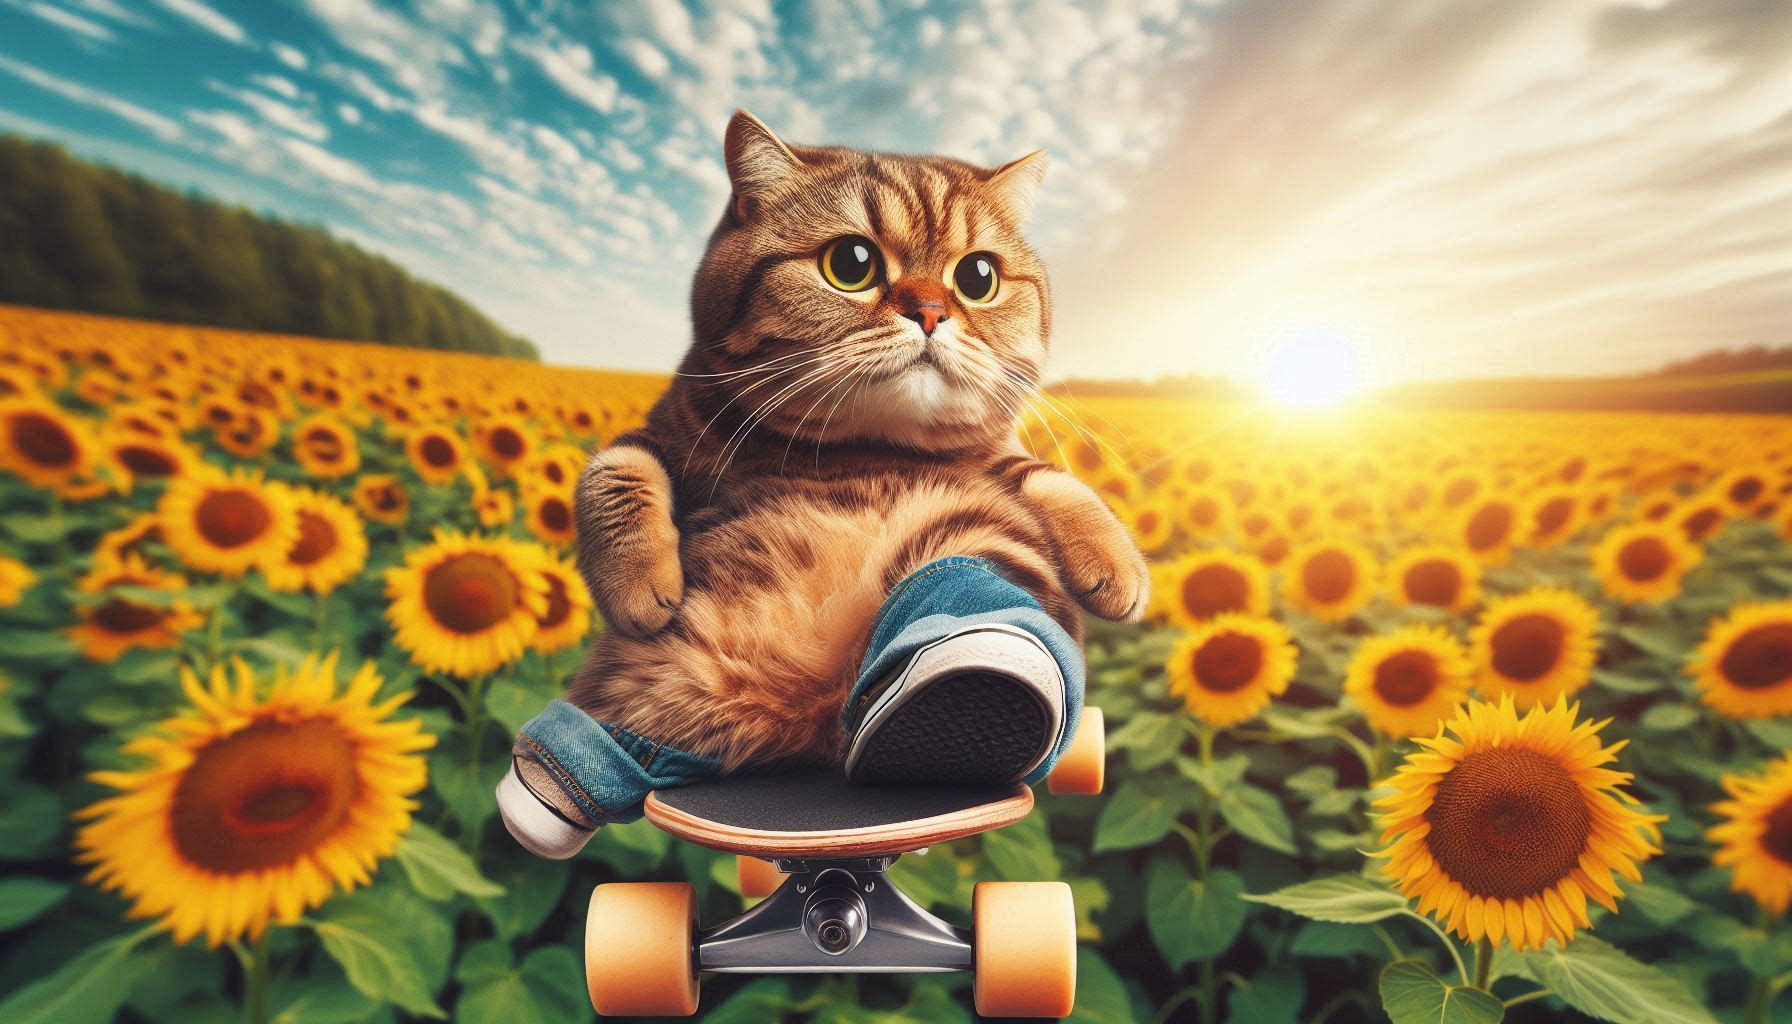 Humorous image of a cat riding a skateboard through a field of sunflowers, demonstrating the creative potential of AI GIF generators.